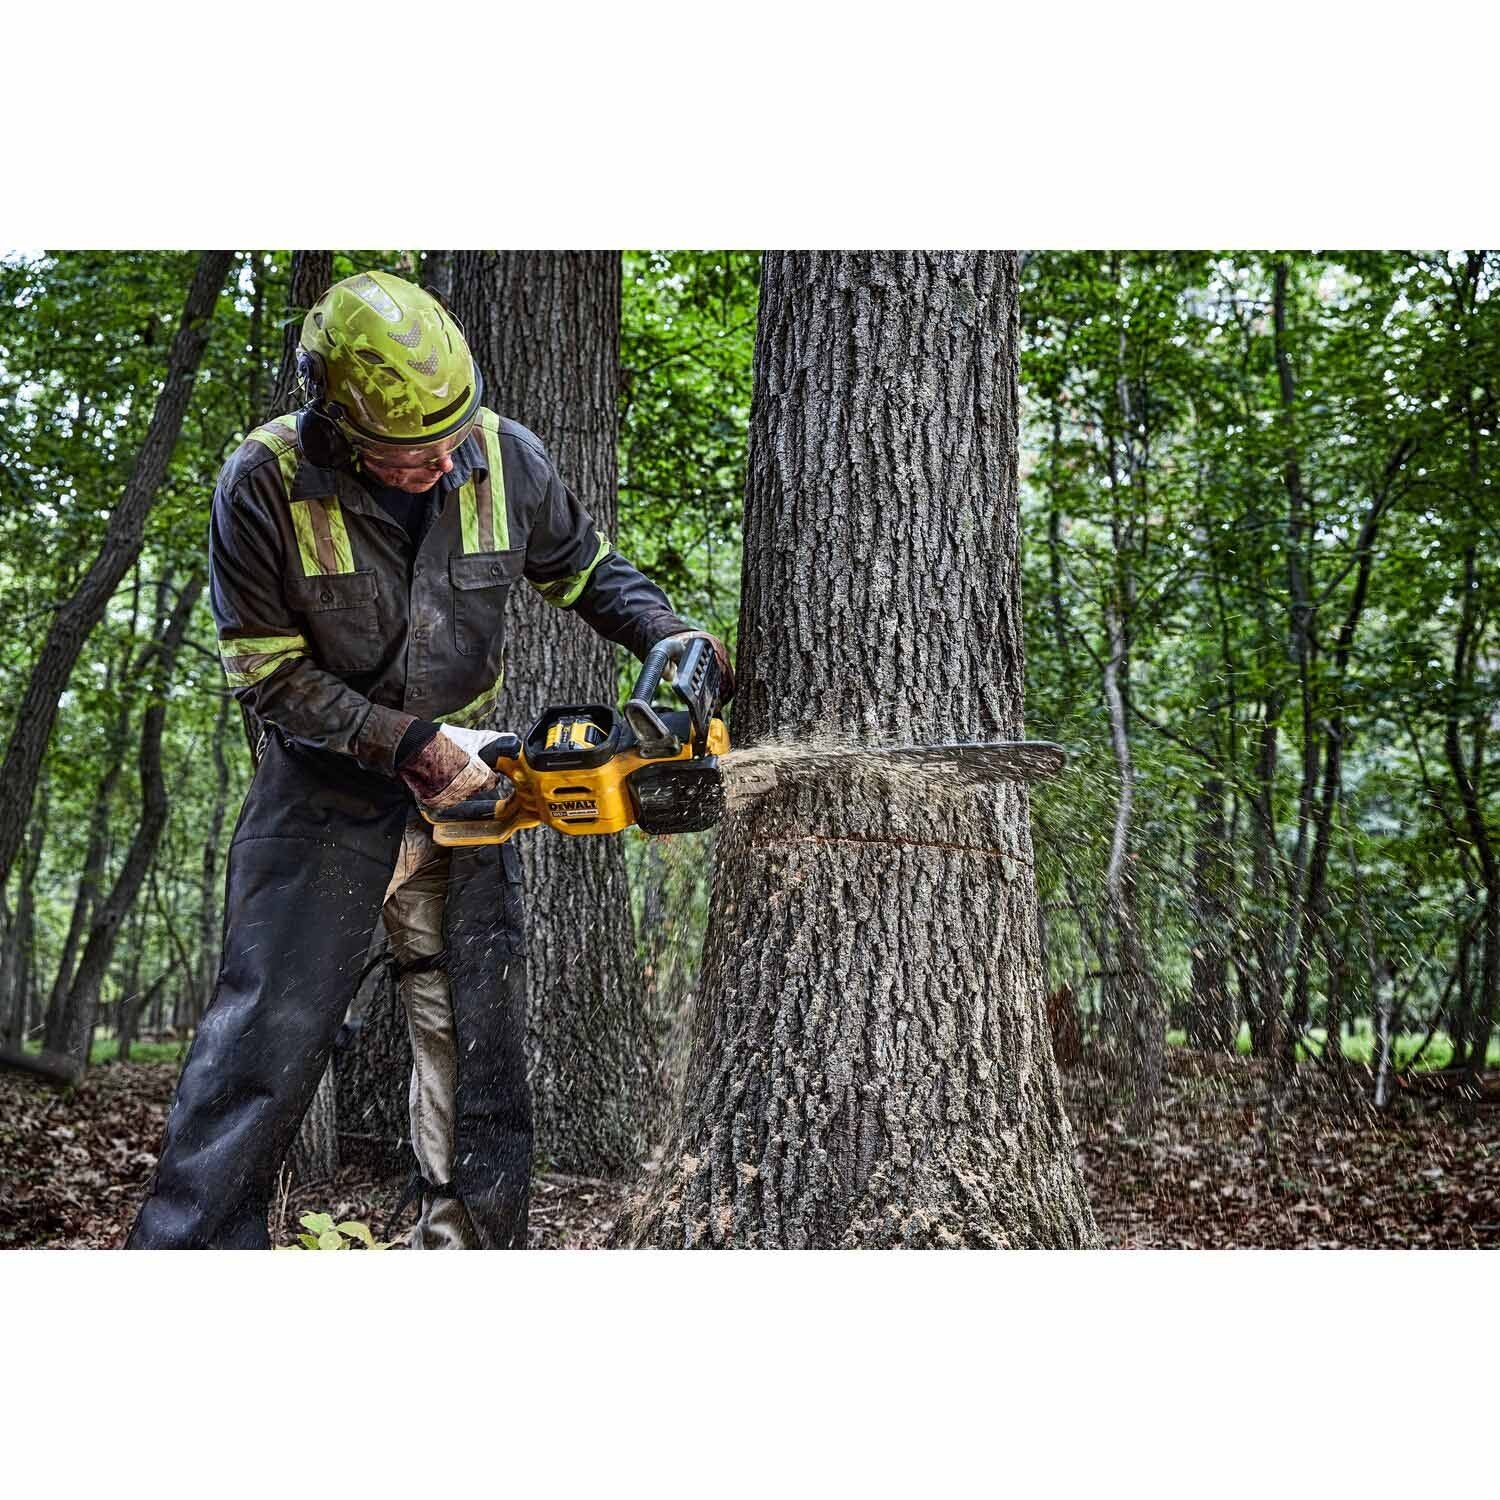 DeWalt DCCS677Y1 60V MAX* Brushless Cordless 20 in. 4.0Ah Chainsaw Kit